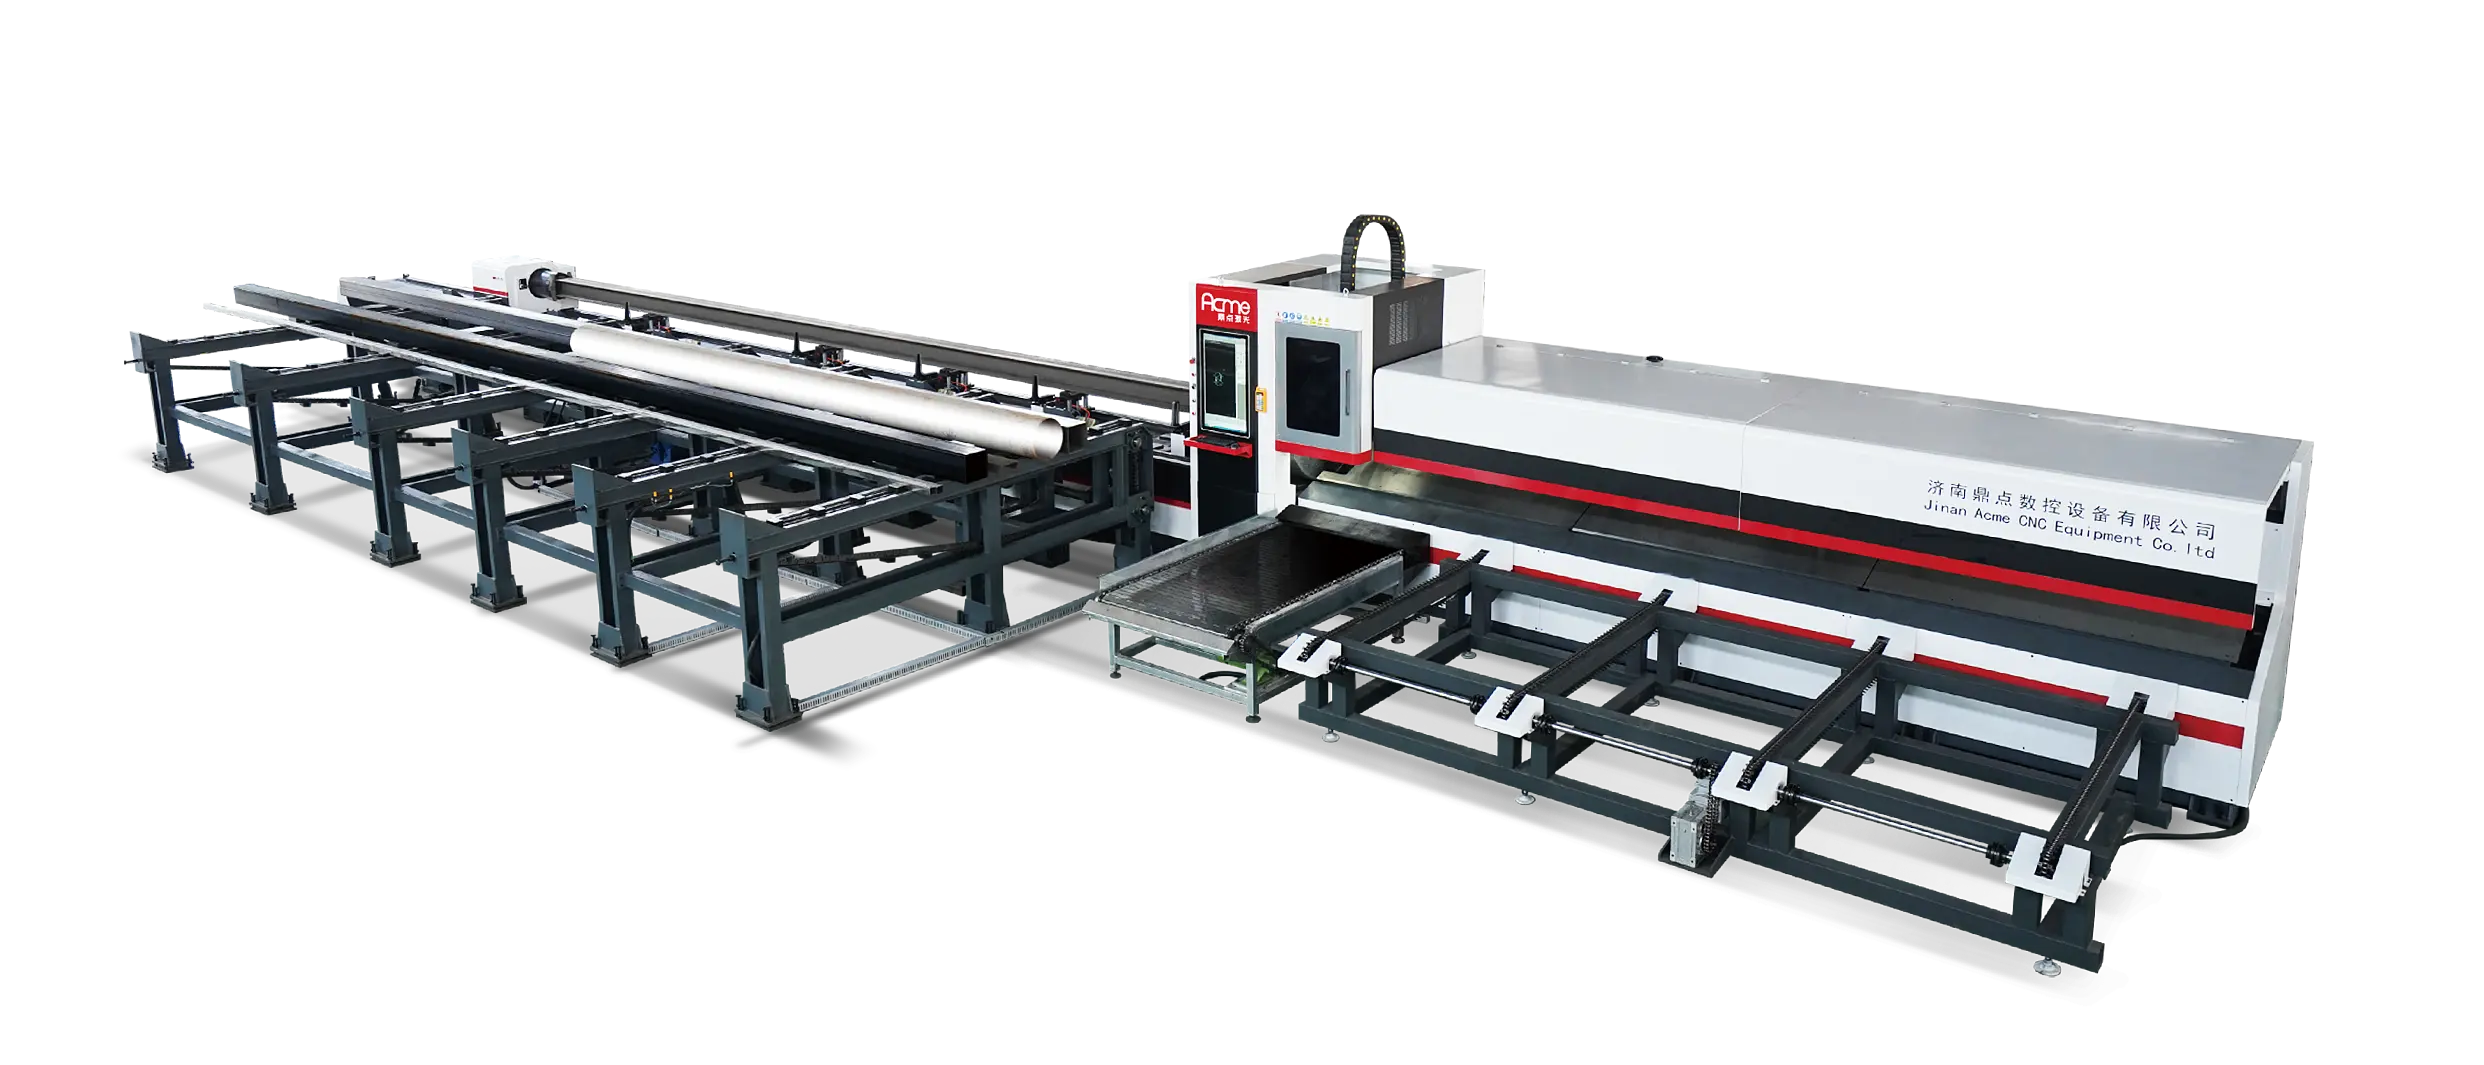 METAL TUBE CUTTING MACHINE WITH LONG MACHINE BED FOR BATCH PROCESSING